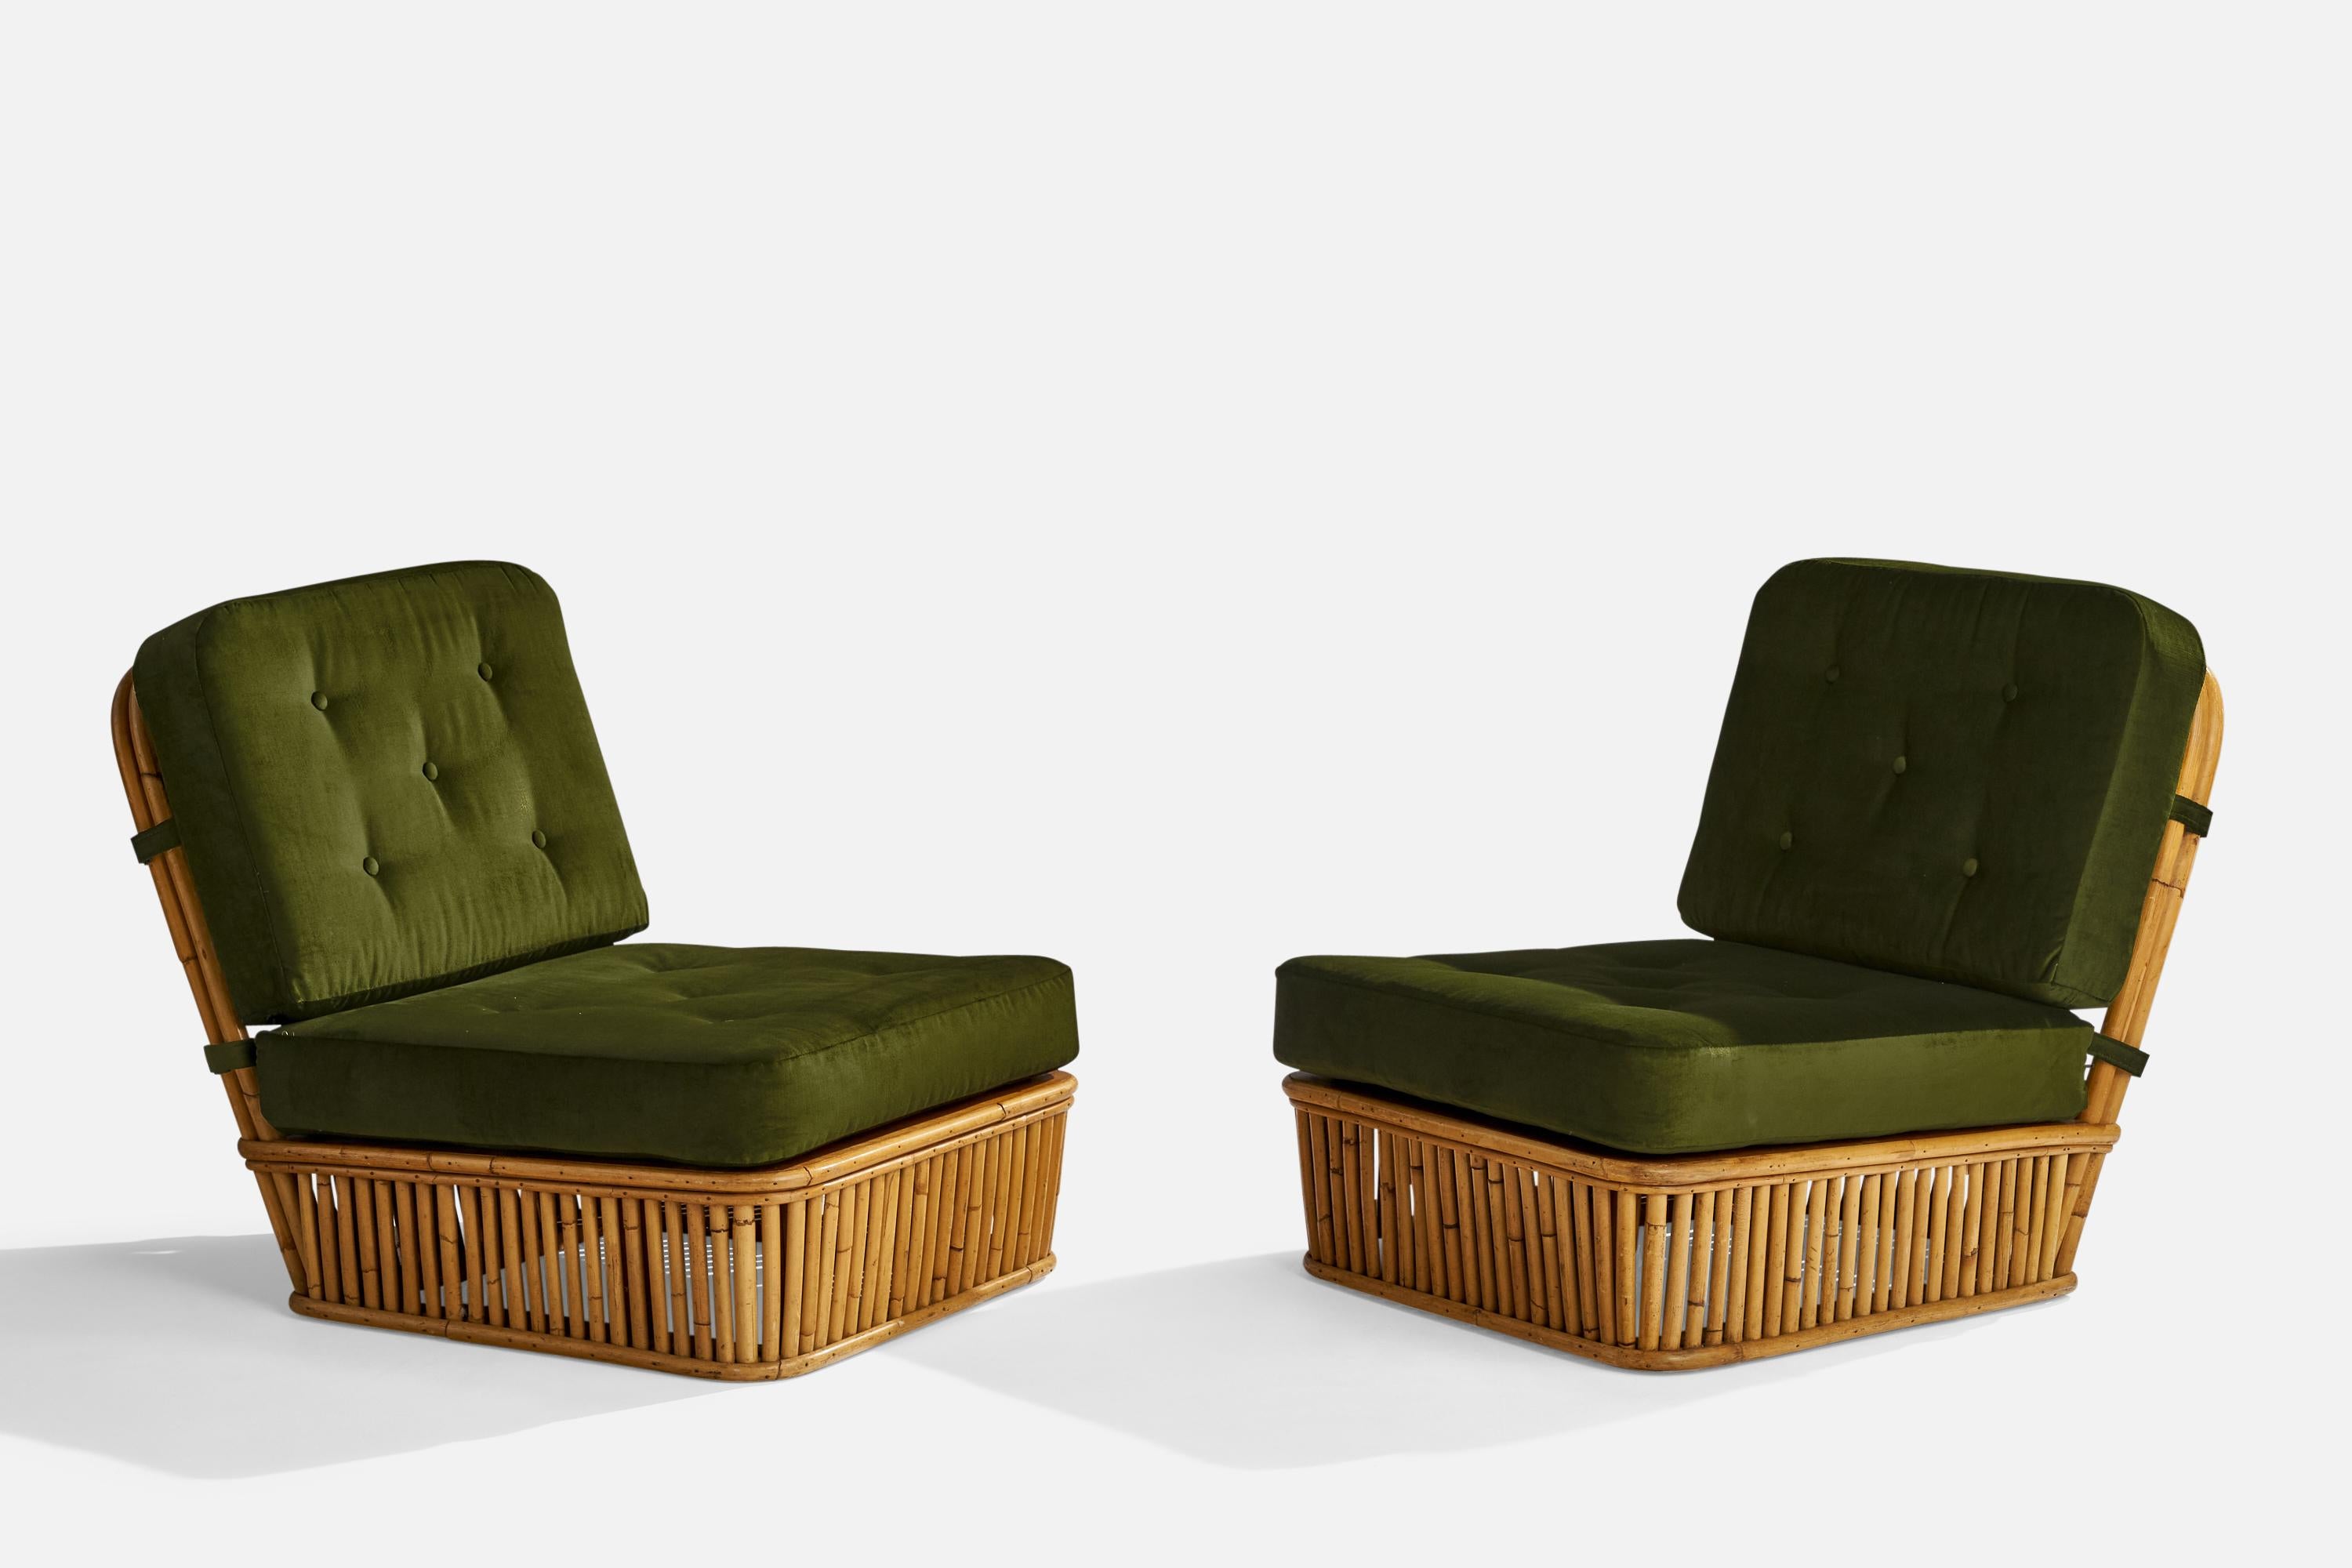 A pair of green velvet and bamboo slipper chairs designed by Paul Frankl and produced by Ficks Reed, USA, 1952.

Seat height 14.25